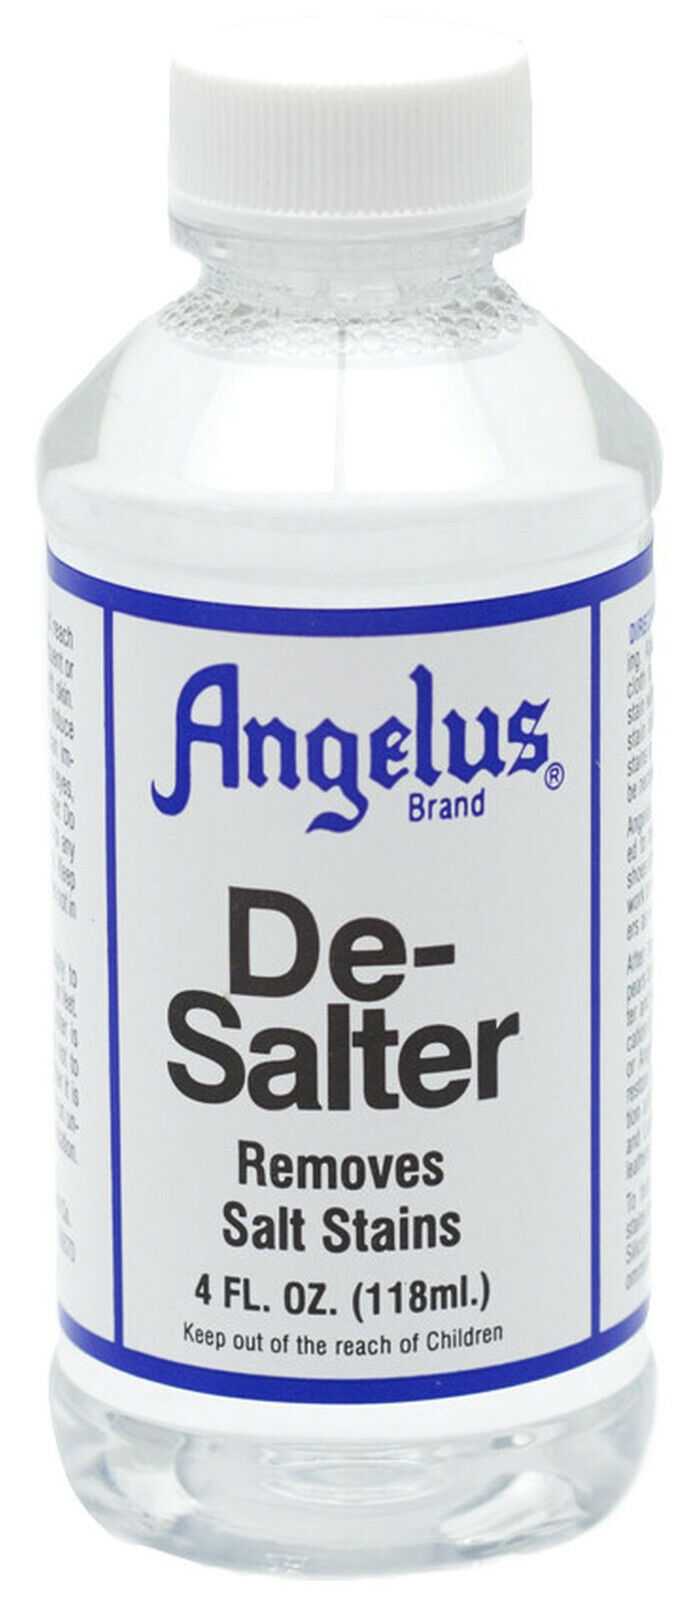 DE-SALTER Water & Stain Remover REMOVE SALT RESIDUE Shoe Boot Leather ANGELUS